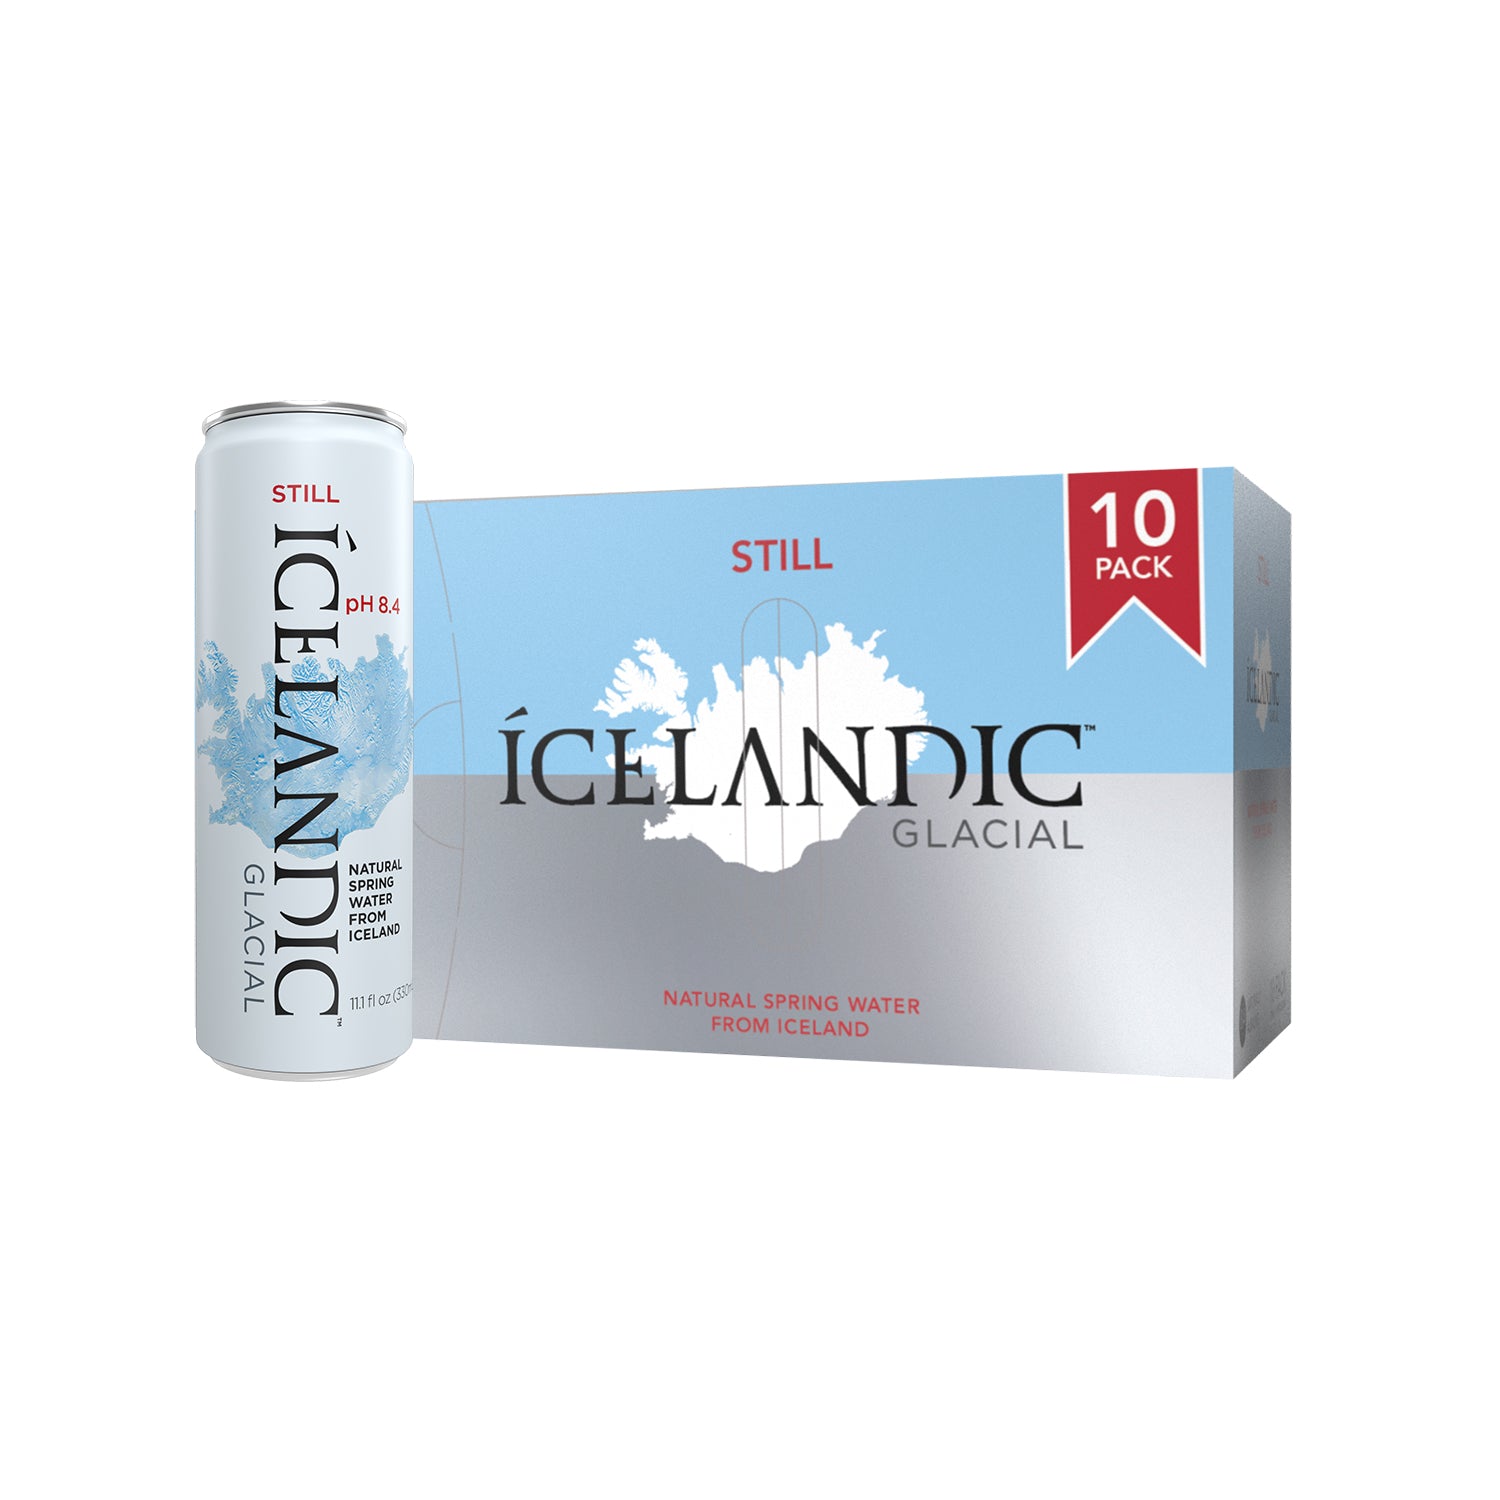 Icelandic Glacial Still Water in Aluminum Cans (30 pack) - Icelandic Glacial